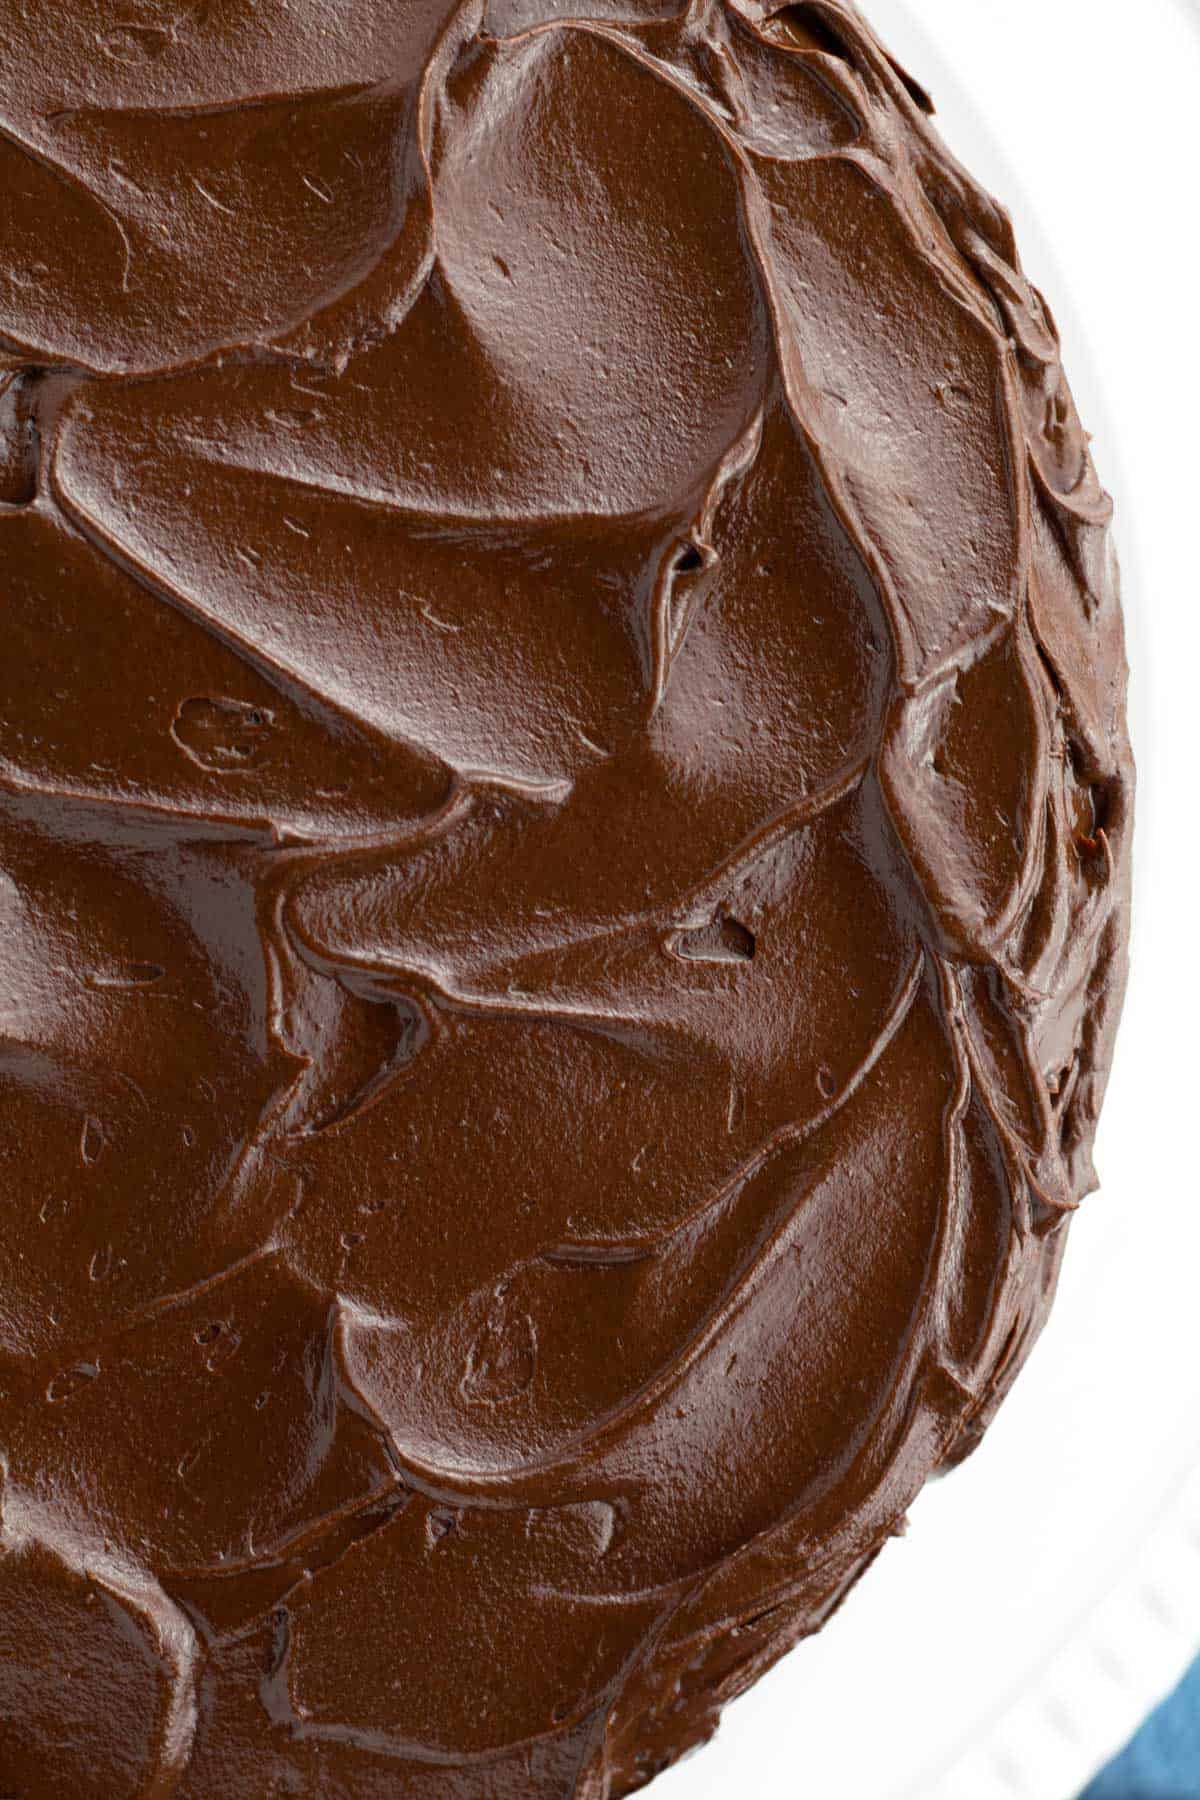 Close up view of chocolate frosting swirled on the top of a cake.